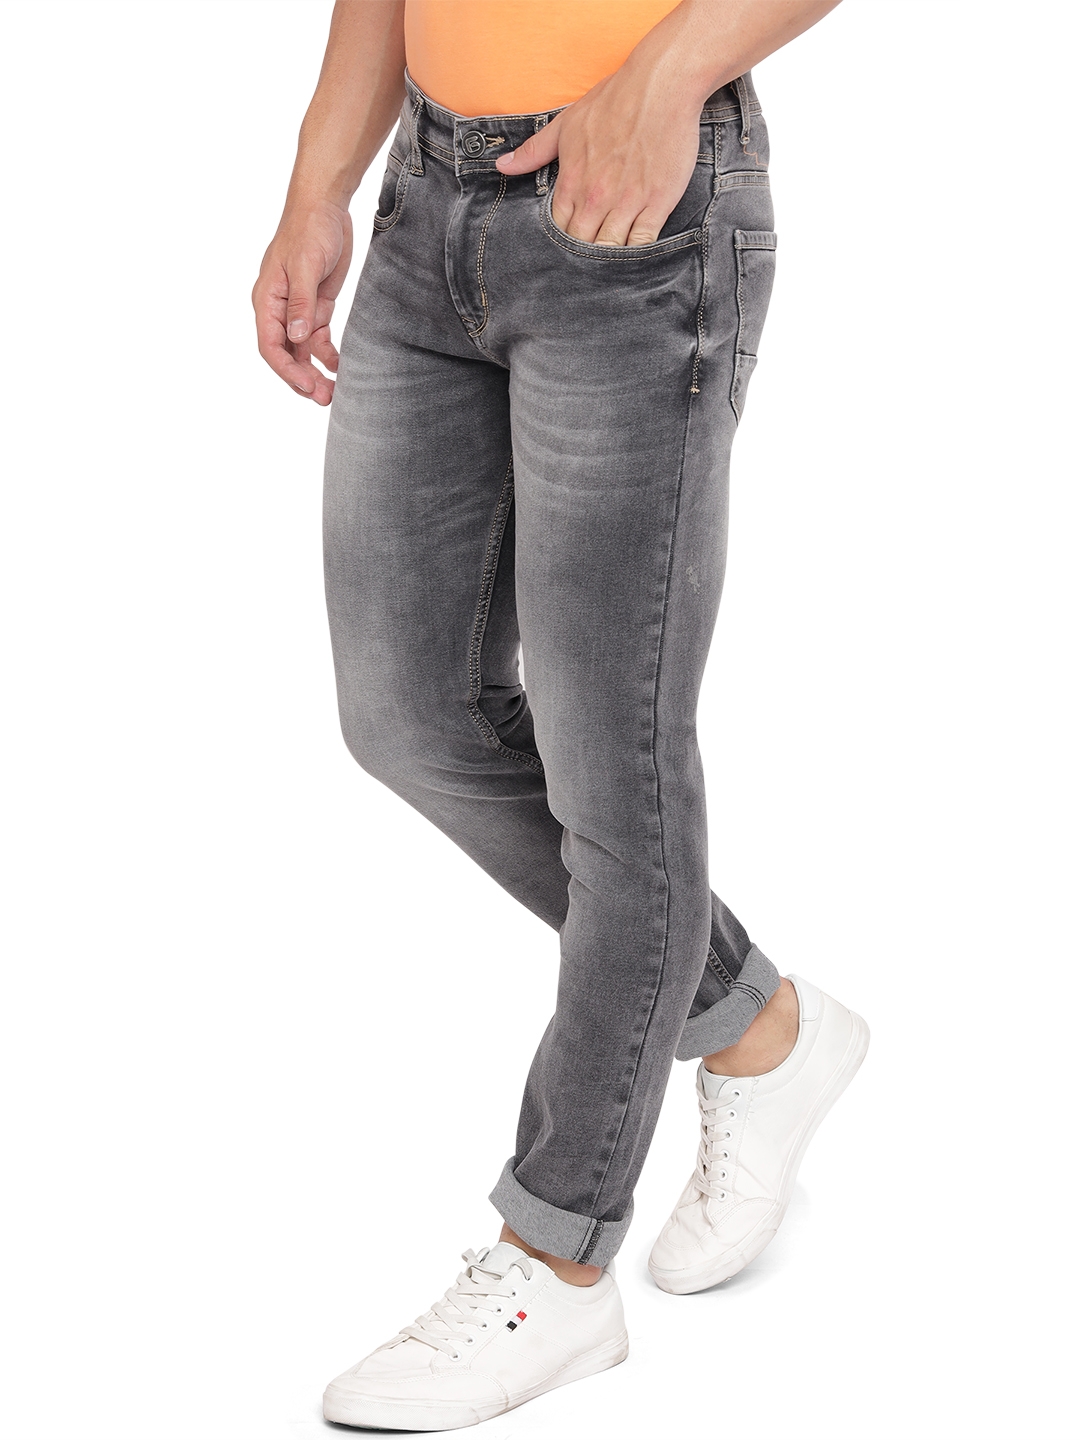 Greenfibre | Forest Grey Solid Narrow Fit Jeans | Greenfibre 1